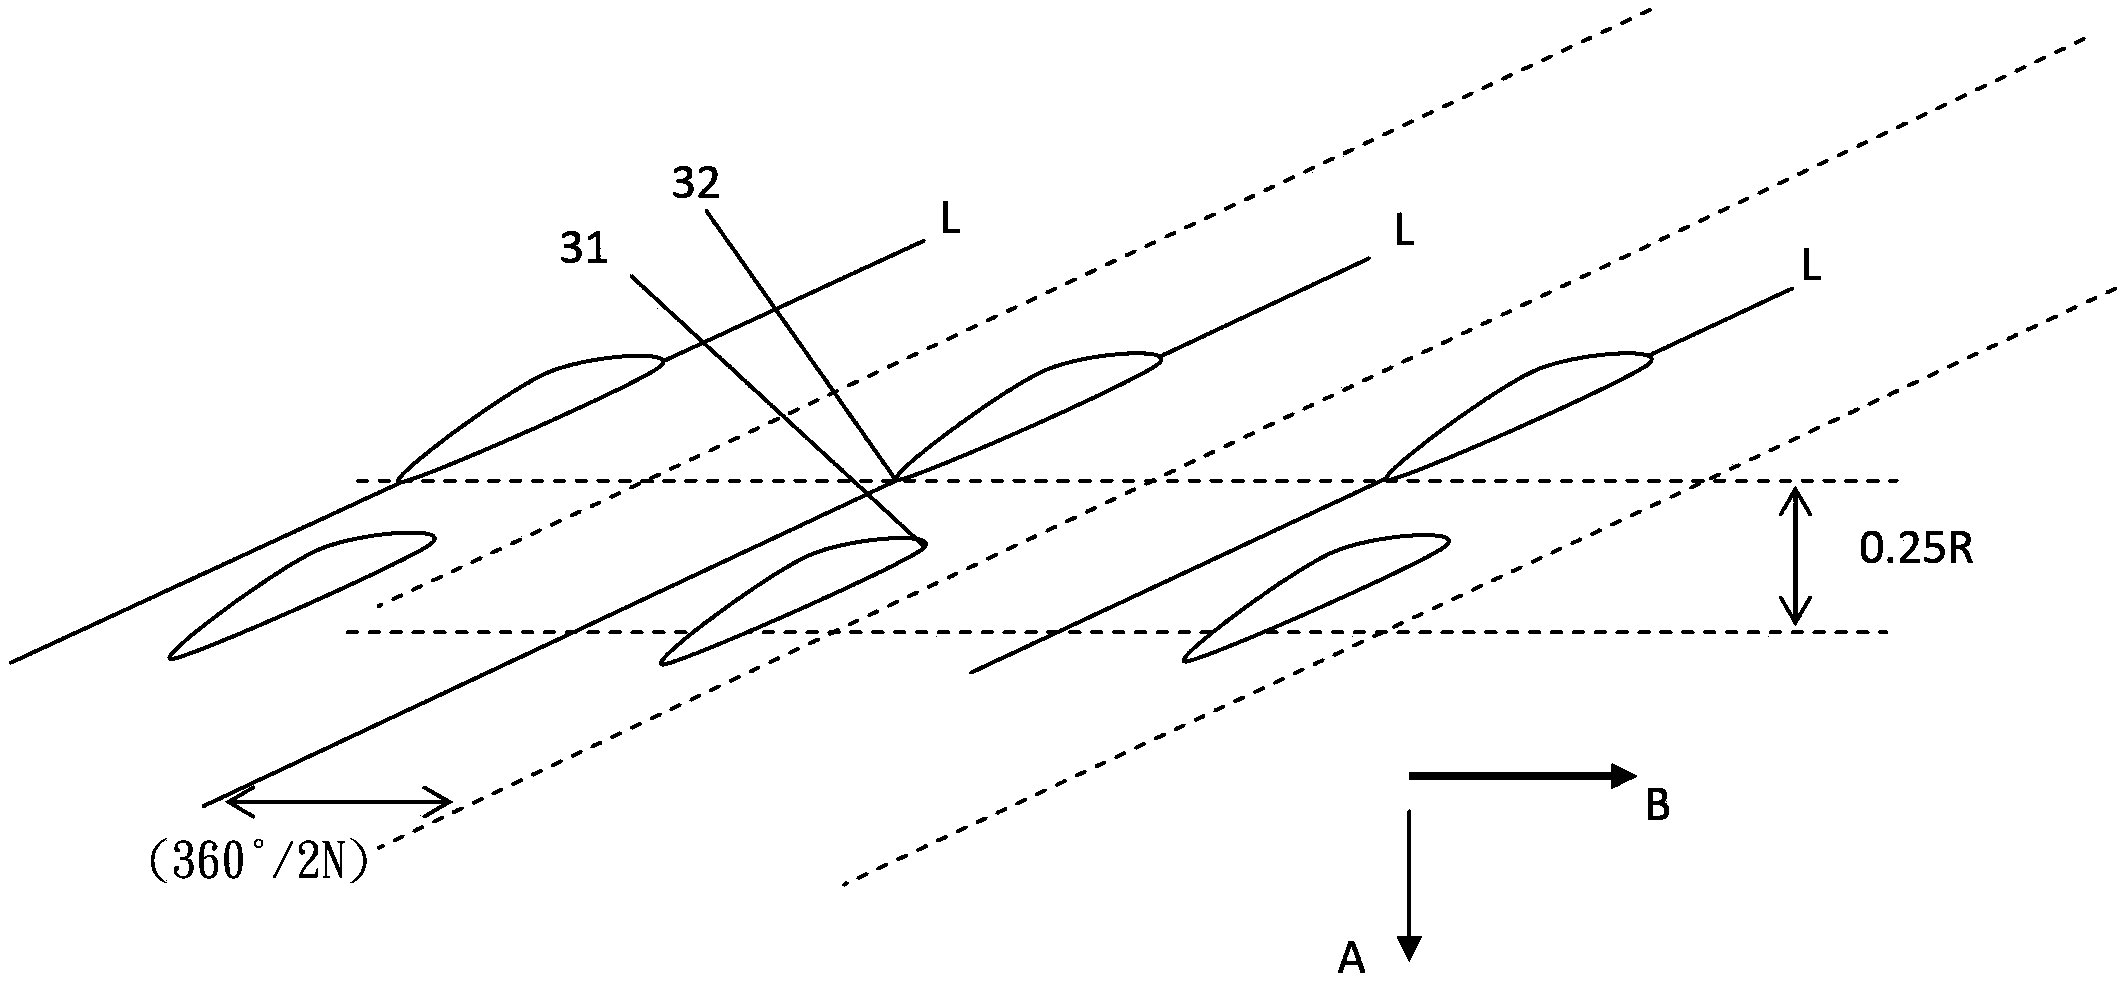 Combined propeller blade structure